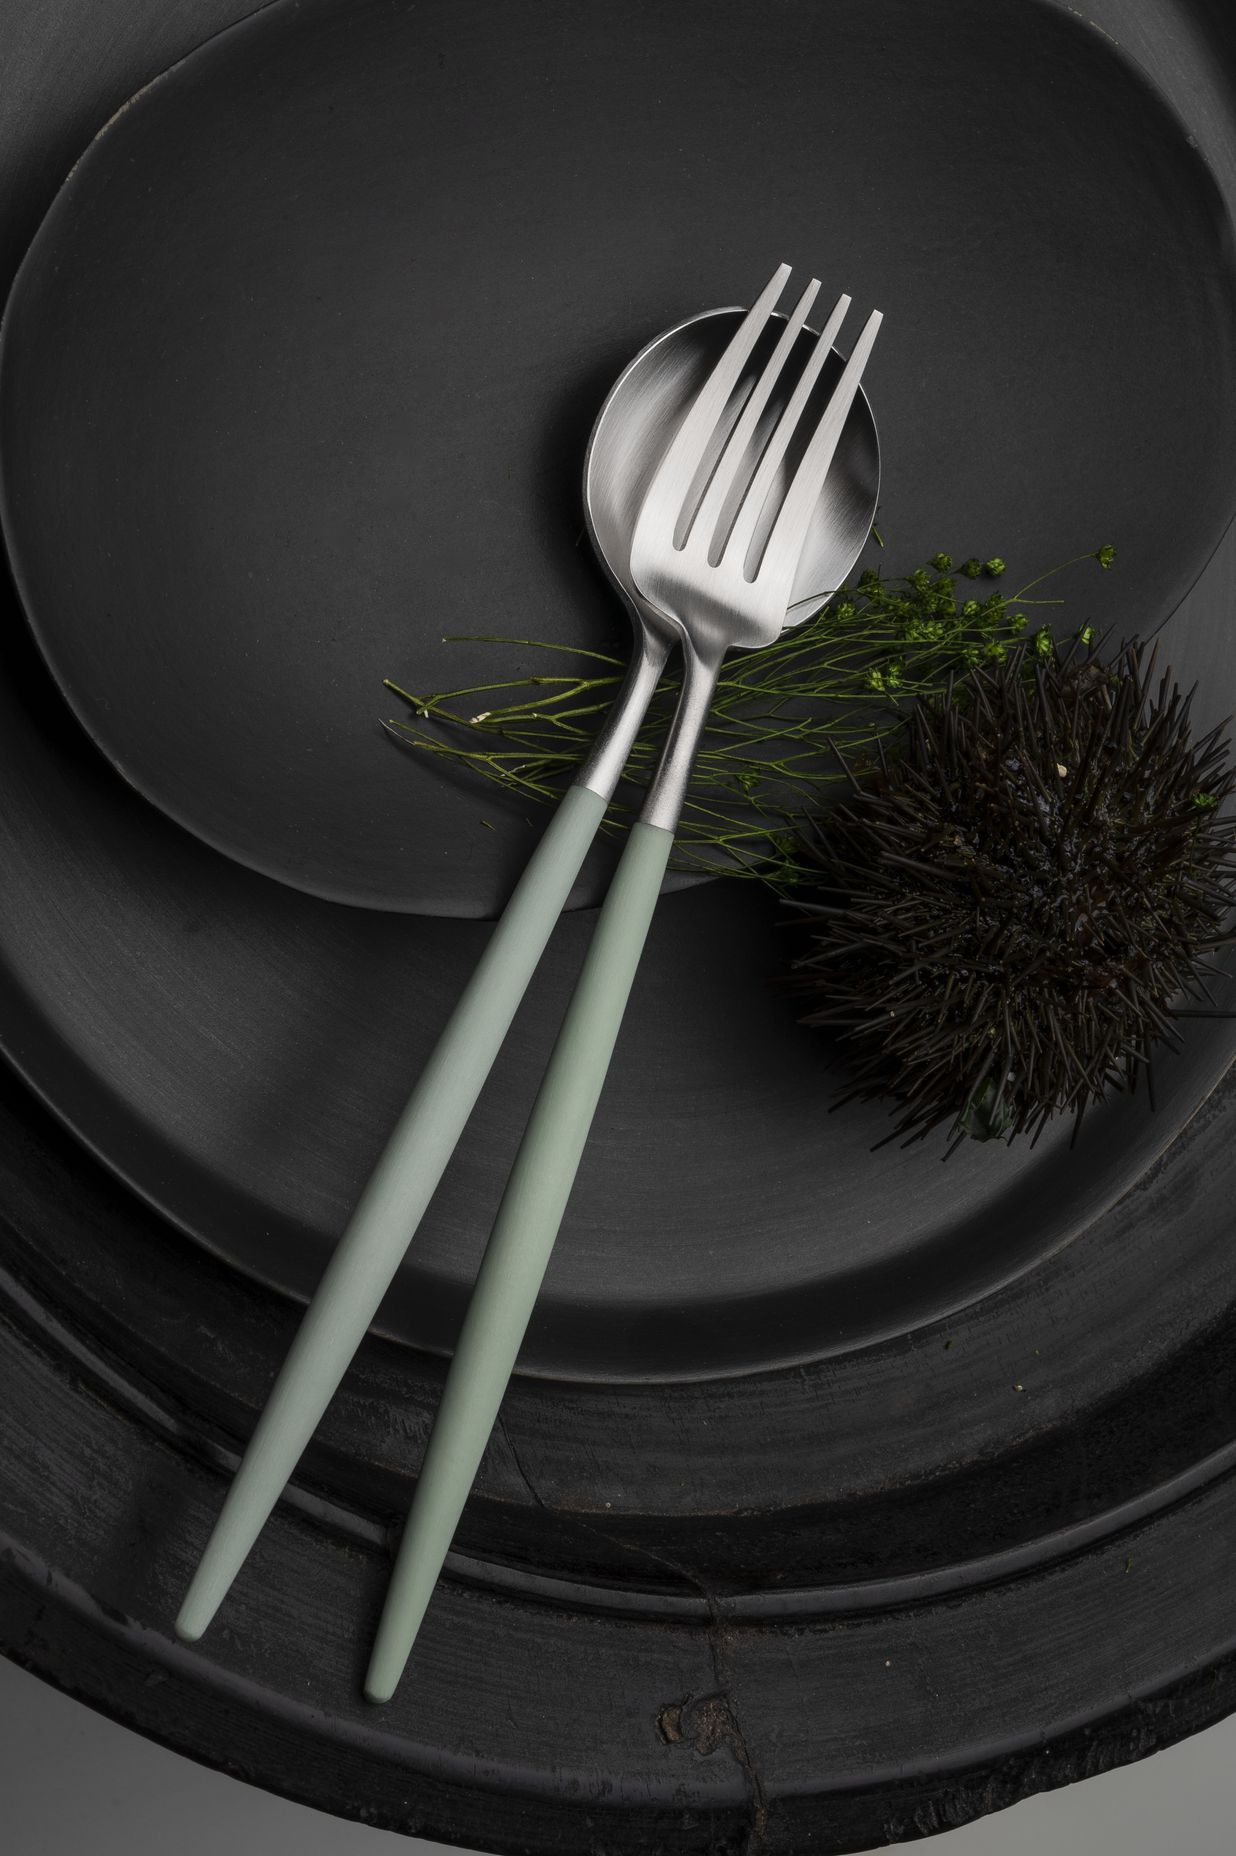 The Cutipol Goa cutlery sets (shown here in Celadon) feature sleek resin handles.